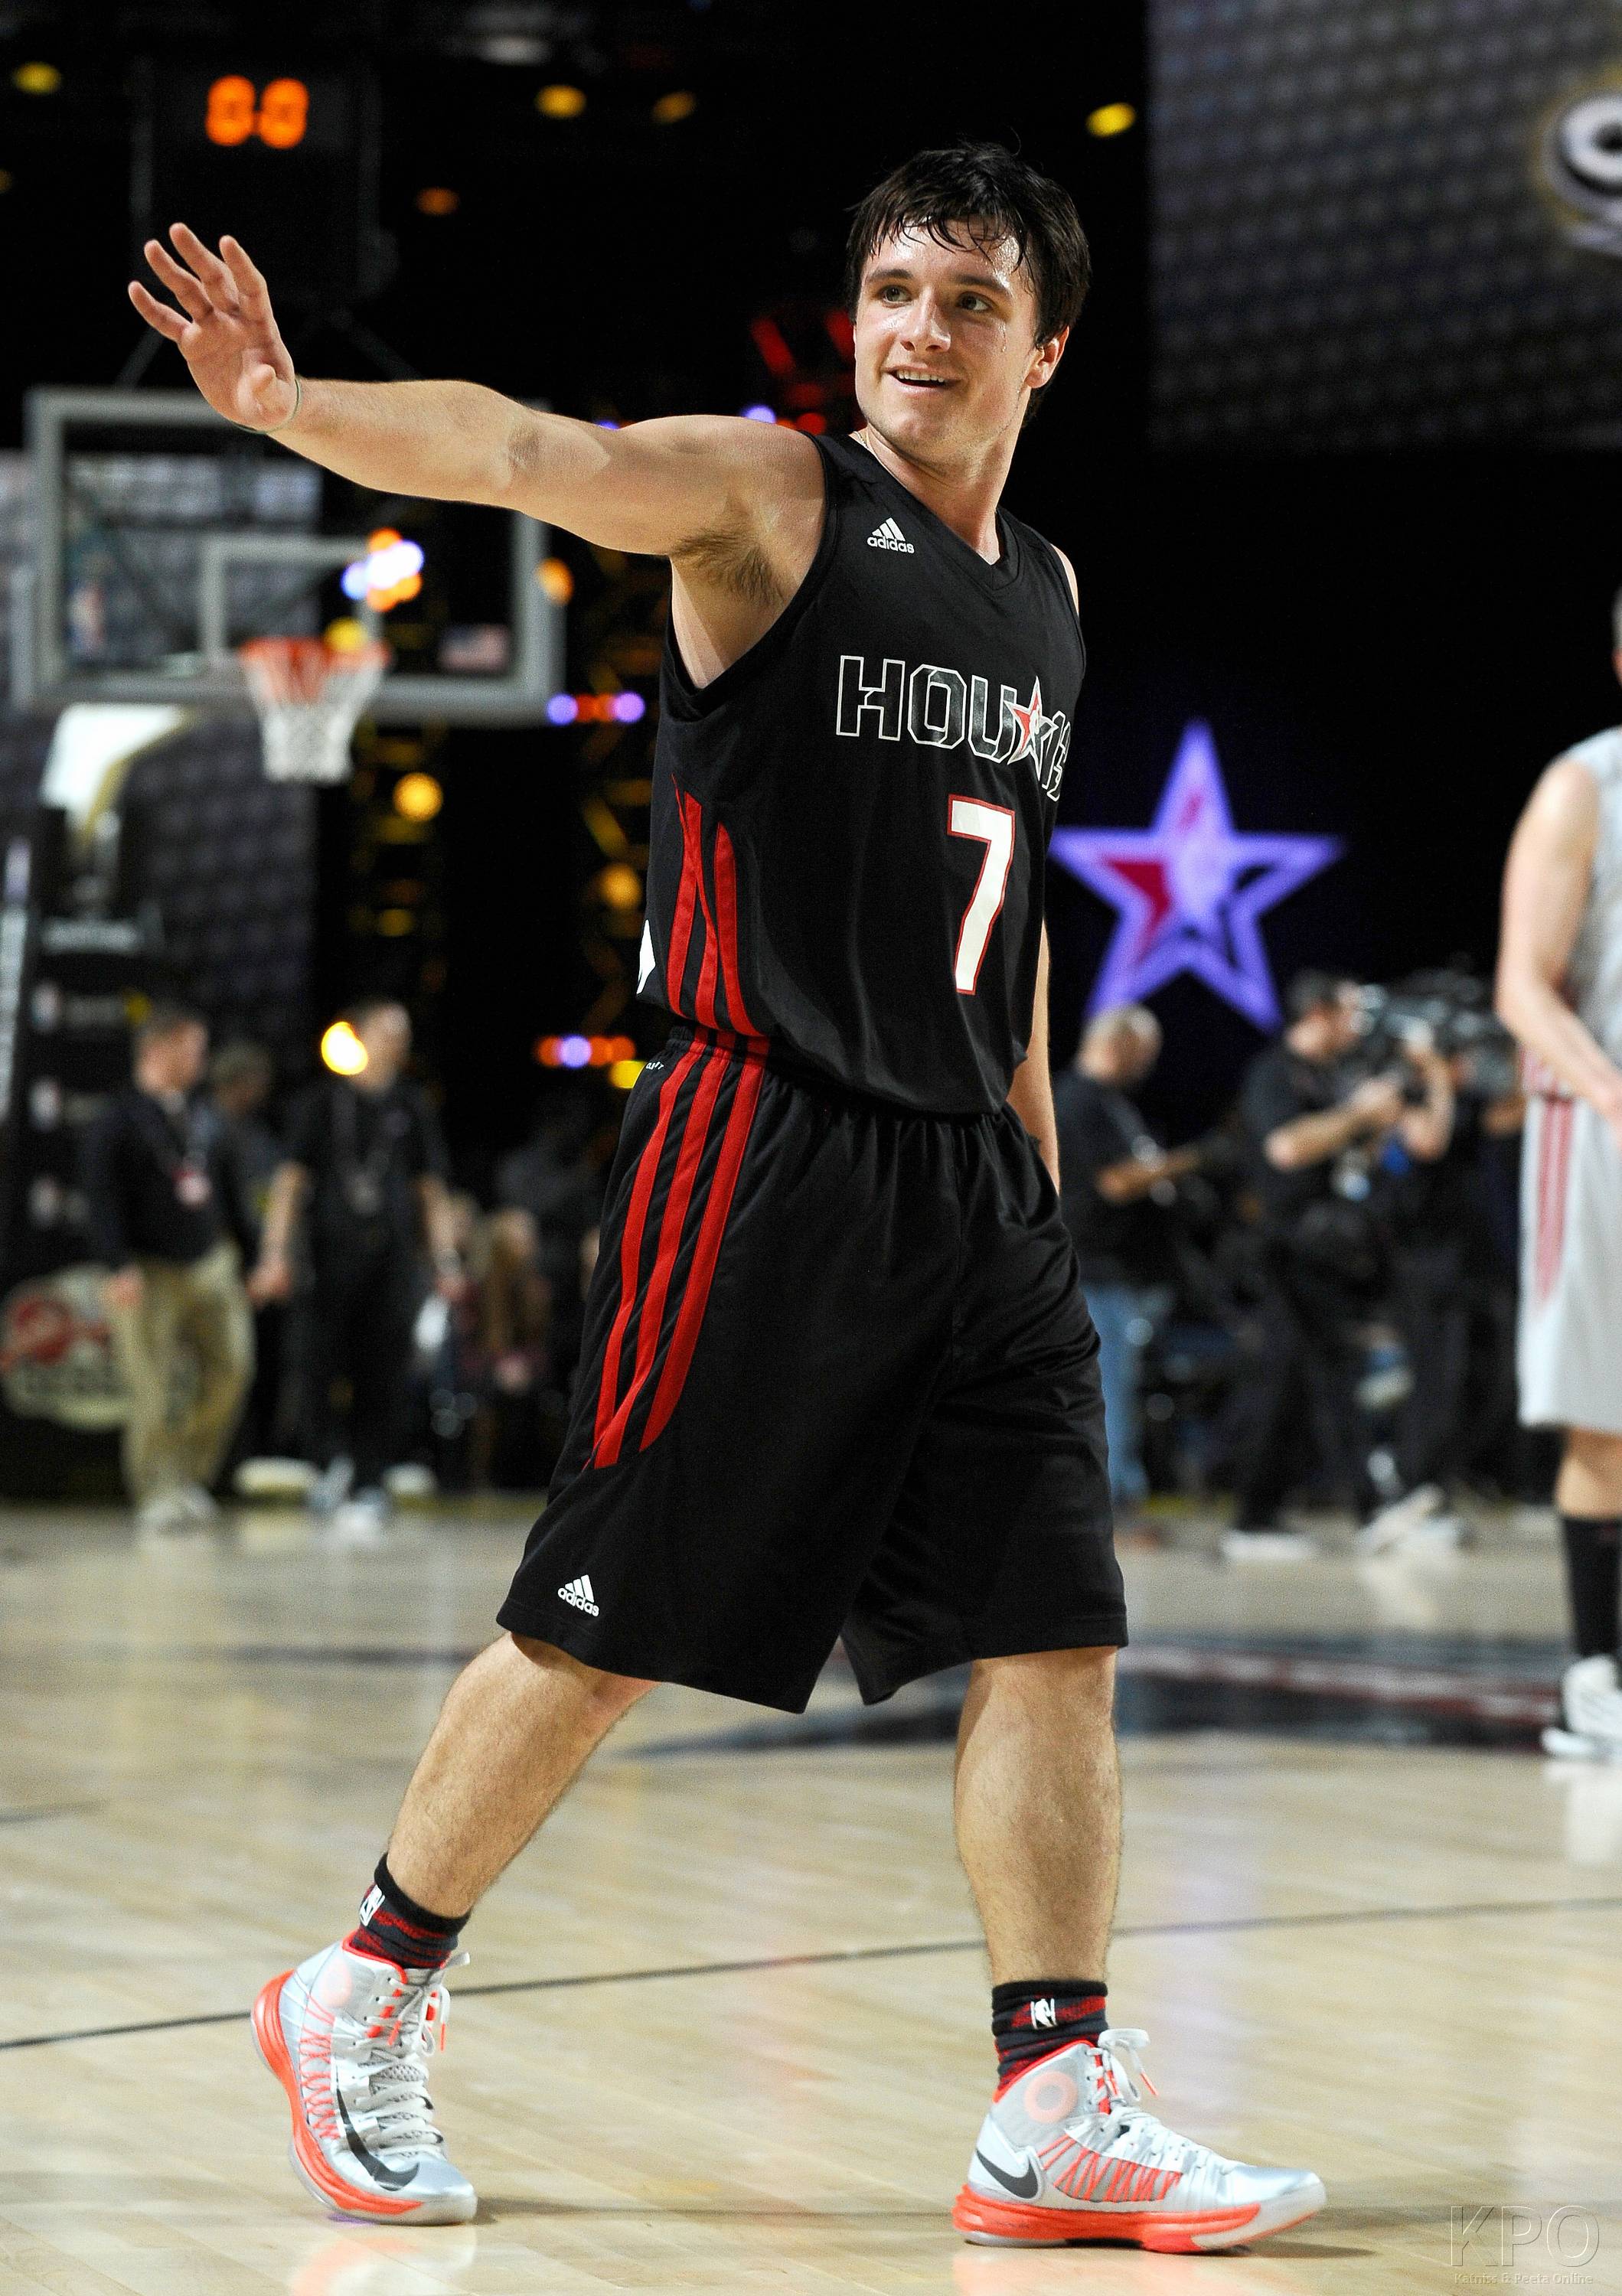 nba all star game celebrity game 2013